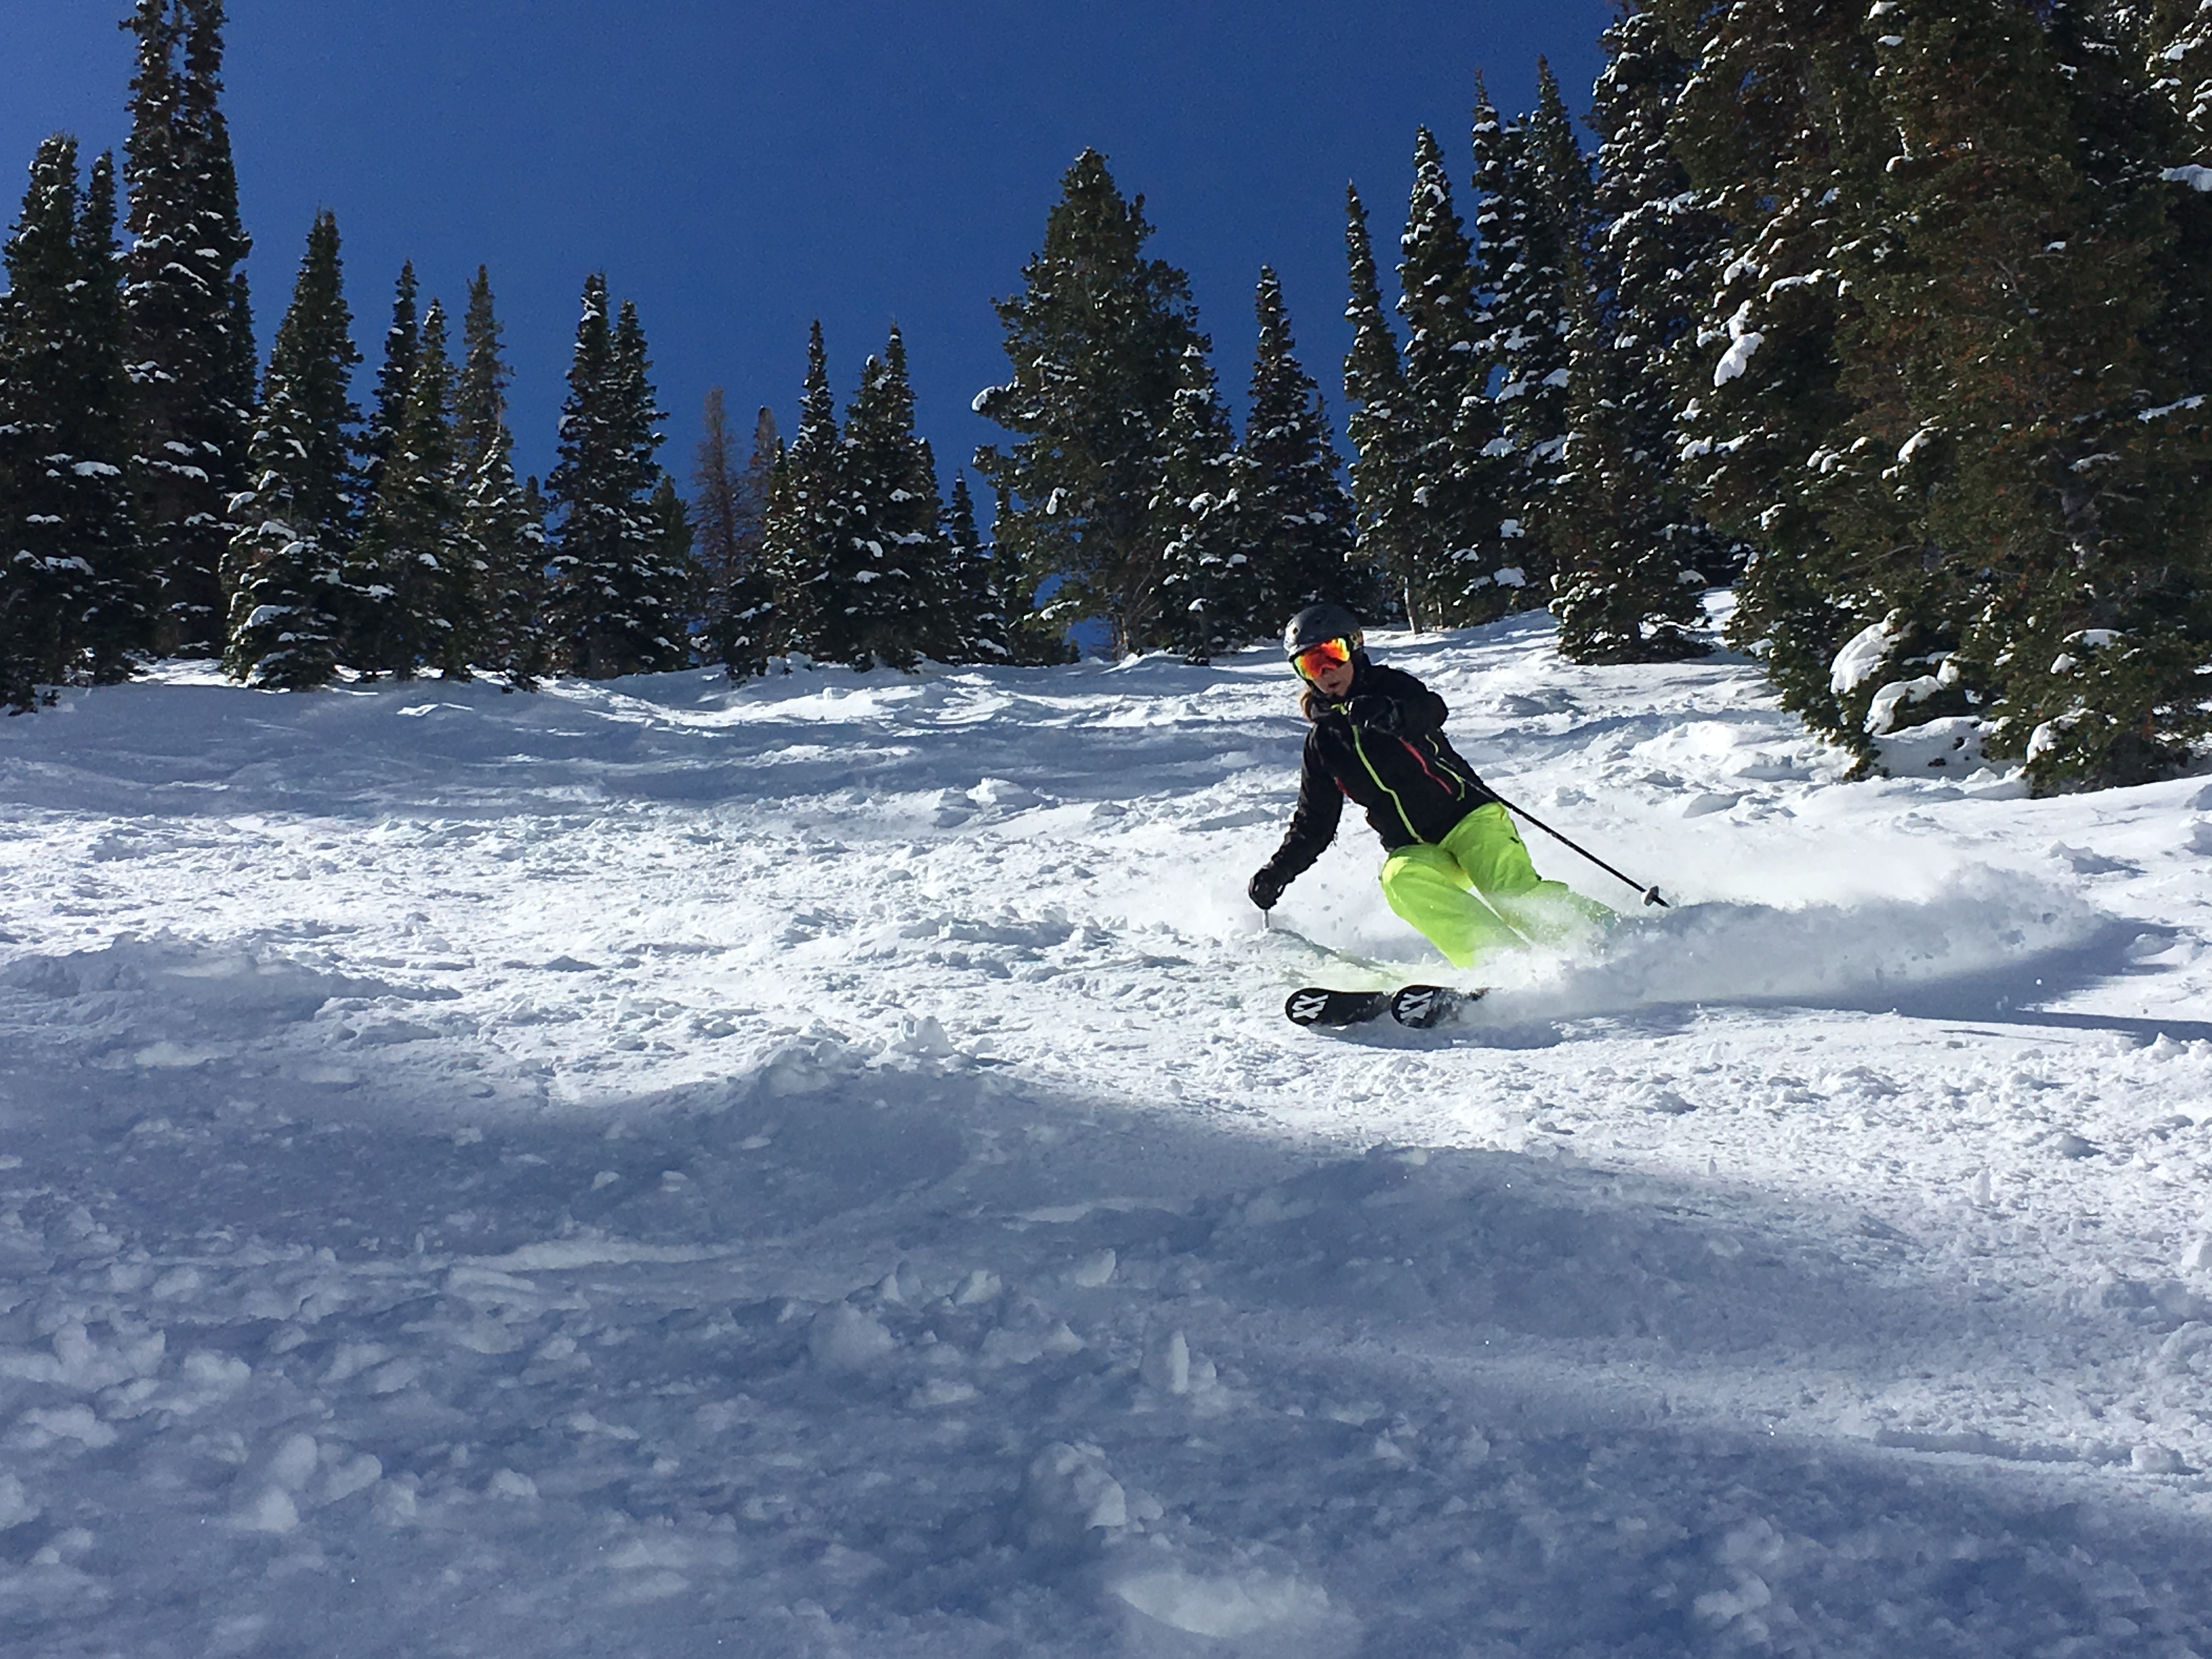 Jenny finding some morning pow